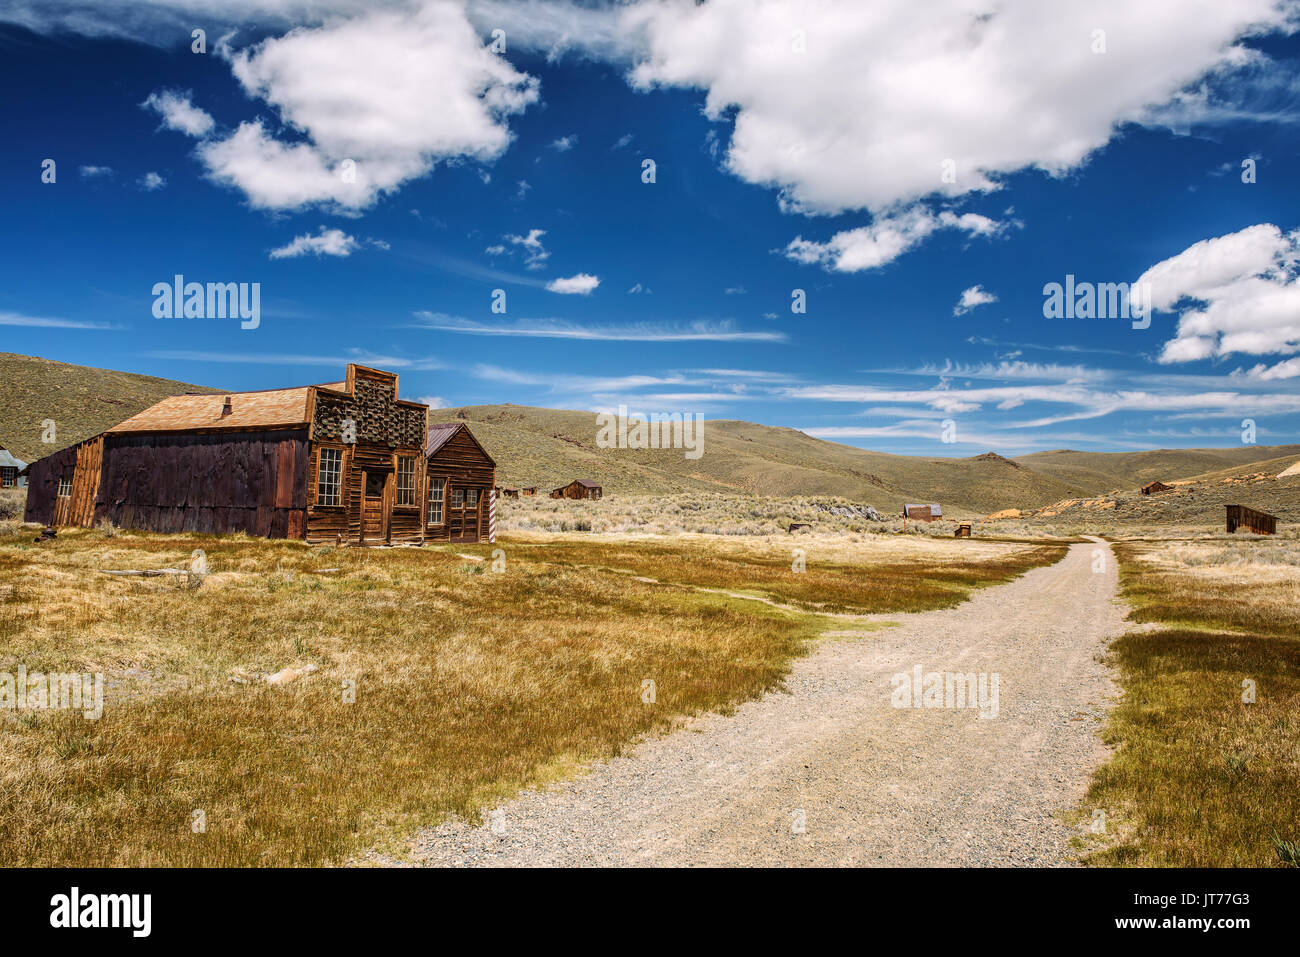 Bodie ghost town in California. Bodie is a historic state park from a gold rush era  in the Bodie Hills east of the Sierra Nevada Stock Photo